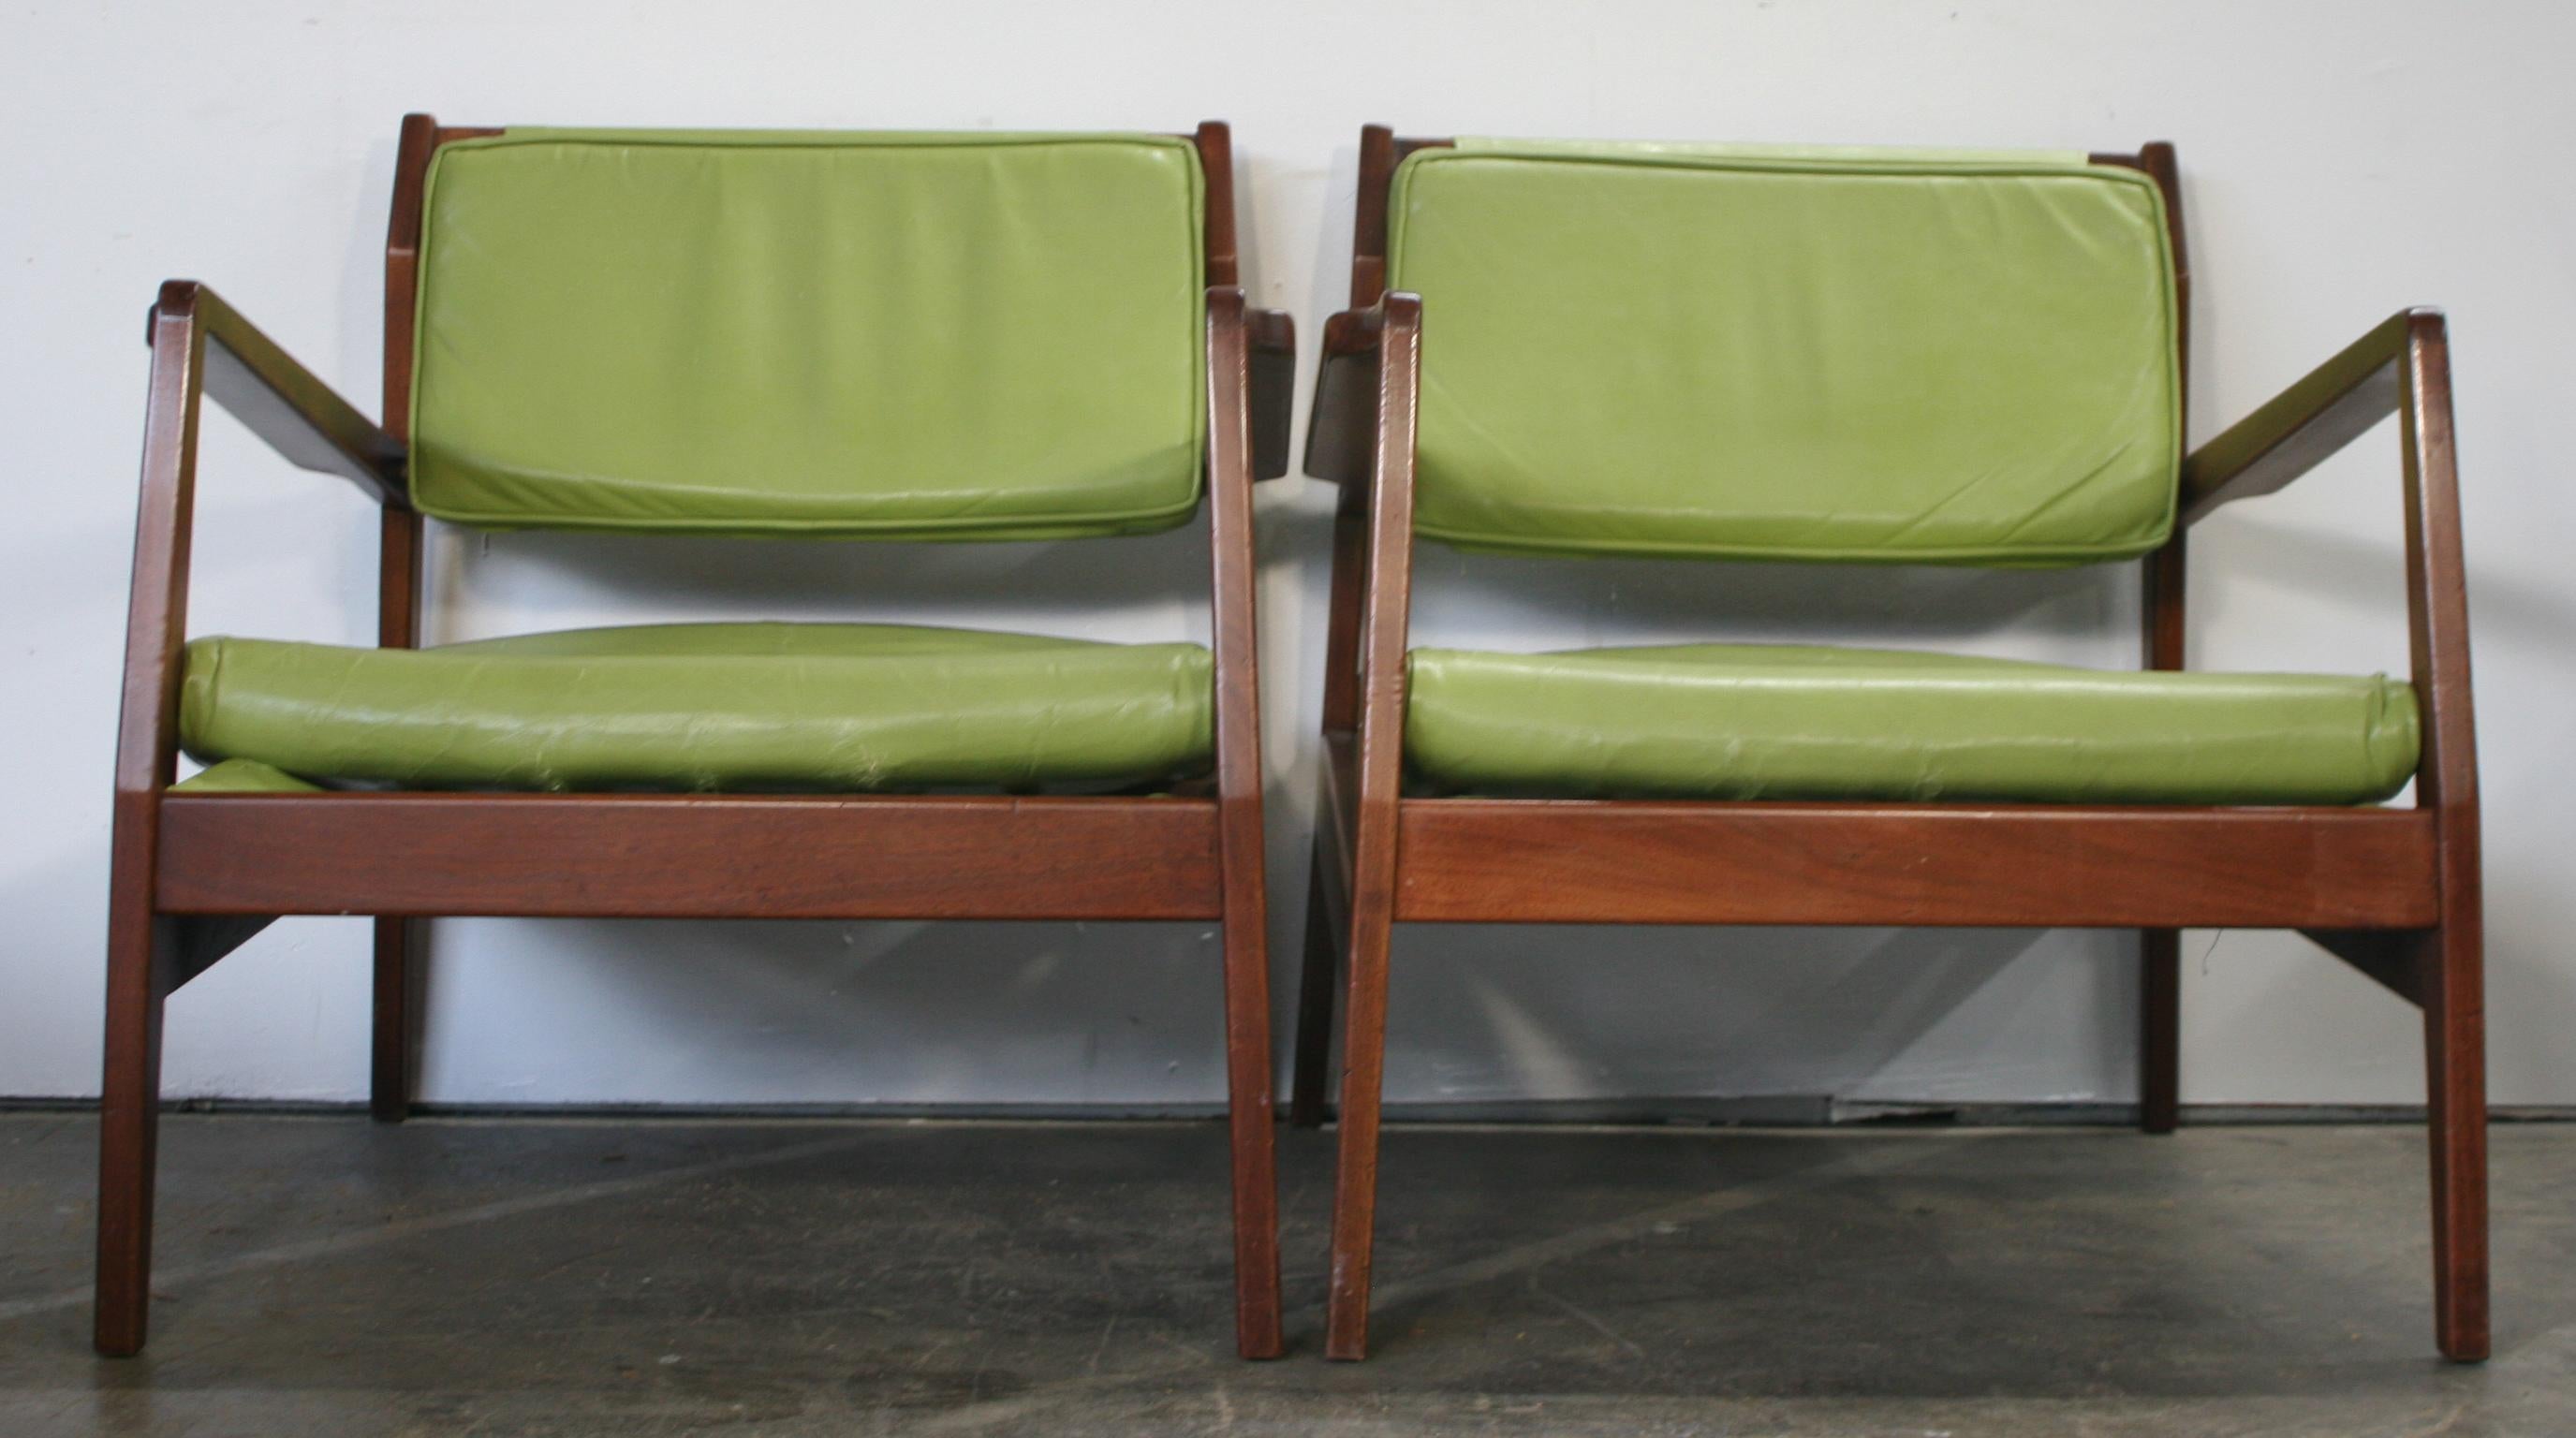 Beautiful Pair of original rare pair midcentury Jens Risom Model #U 460 Lime Green Leather low lounge chairs. Solid teak frames with drop over back cushion. All original leather upholstery. Original vintage condition shows normal wear. Has original